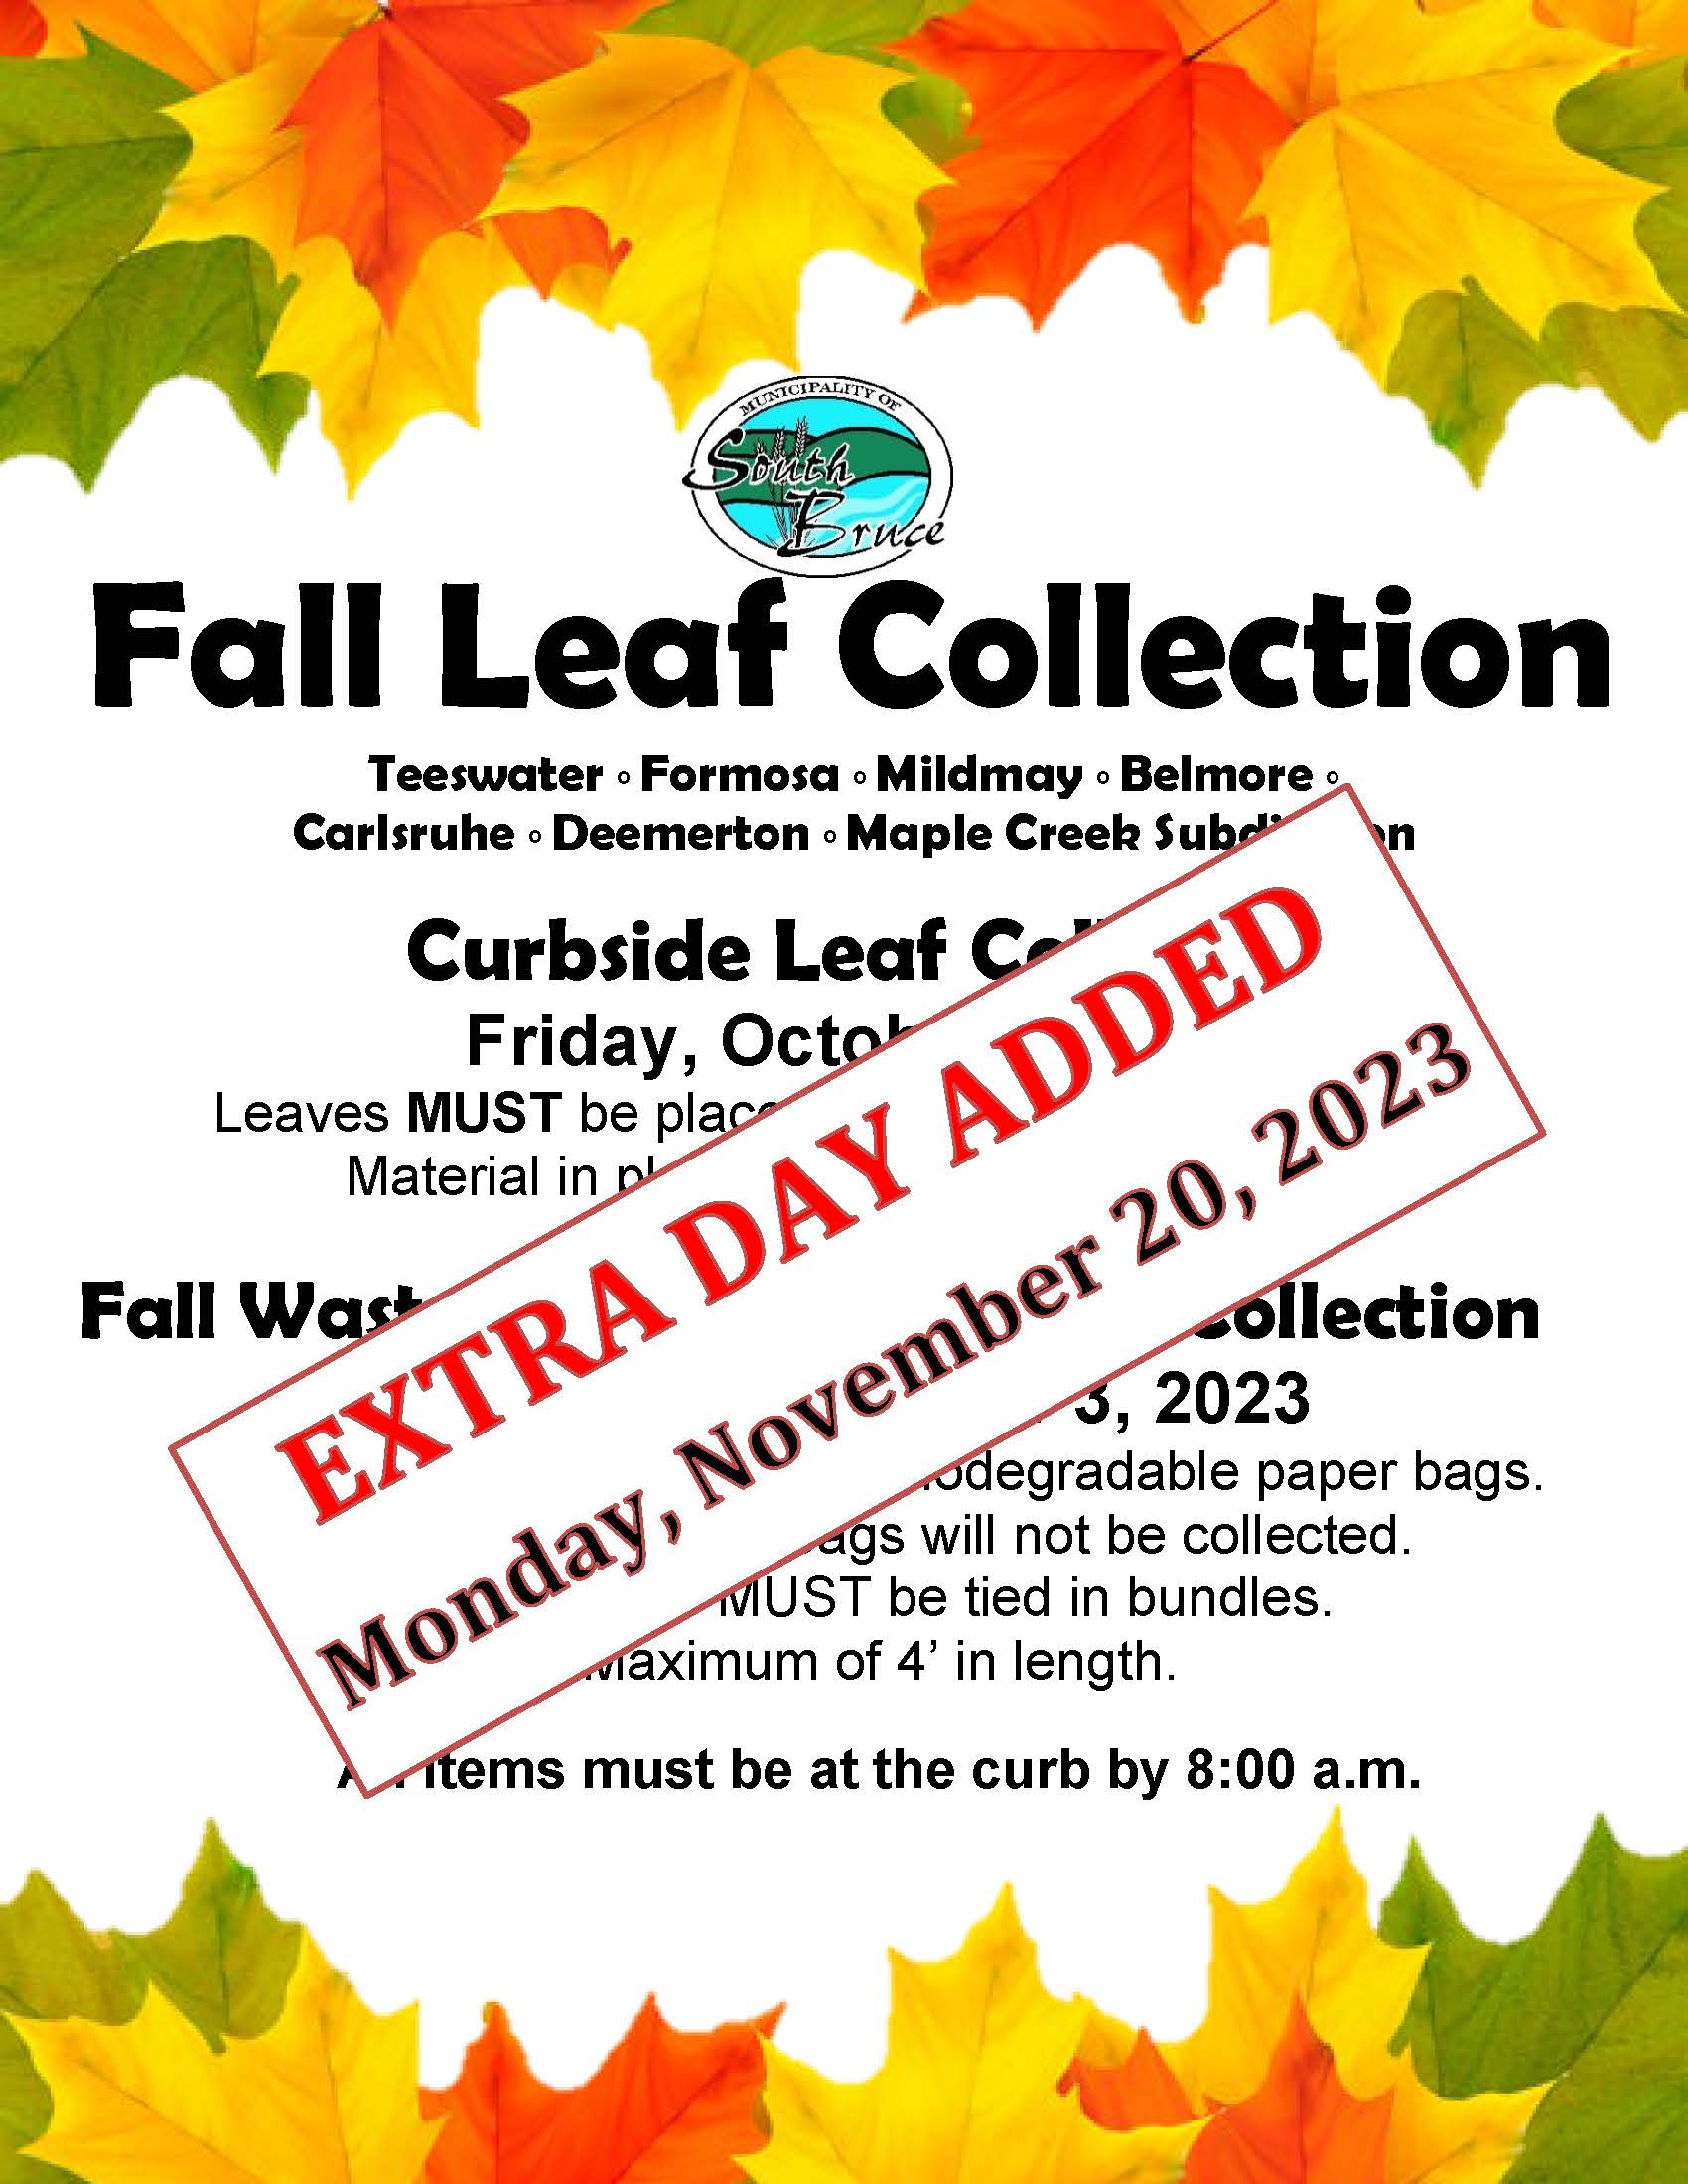 Extra Pick Up Day Added Monday, November 20, 2023 Teeswater, Formosa, Mildmay, Belmore, Carlsruhe, Deemerton, Maple Creek Subdivision.  All Items must be at the curb by 8:00 a.m. Curbside Leaf Collection - Friday, October 28, 2022  Leaves MUST be placed in biodegradable paper bags.  Material in plastic bags will not be collected. Fall Waste and Curbside Leaf Collection - Friday, November 4, 2022  Leaves MUST be placed in biodegradable paper bags.  Material in plastic bags will not be collected.  Yard waste MUST be tied in bundles.  Maximum of 4’ in length.